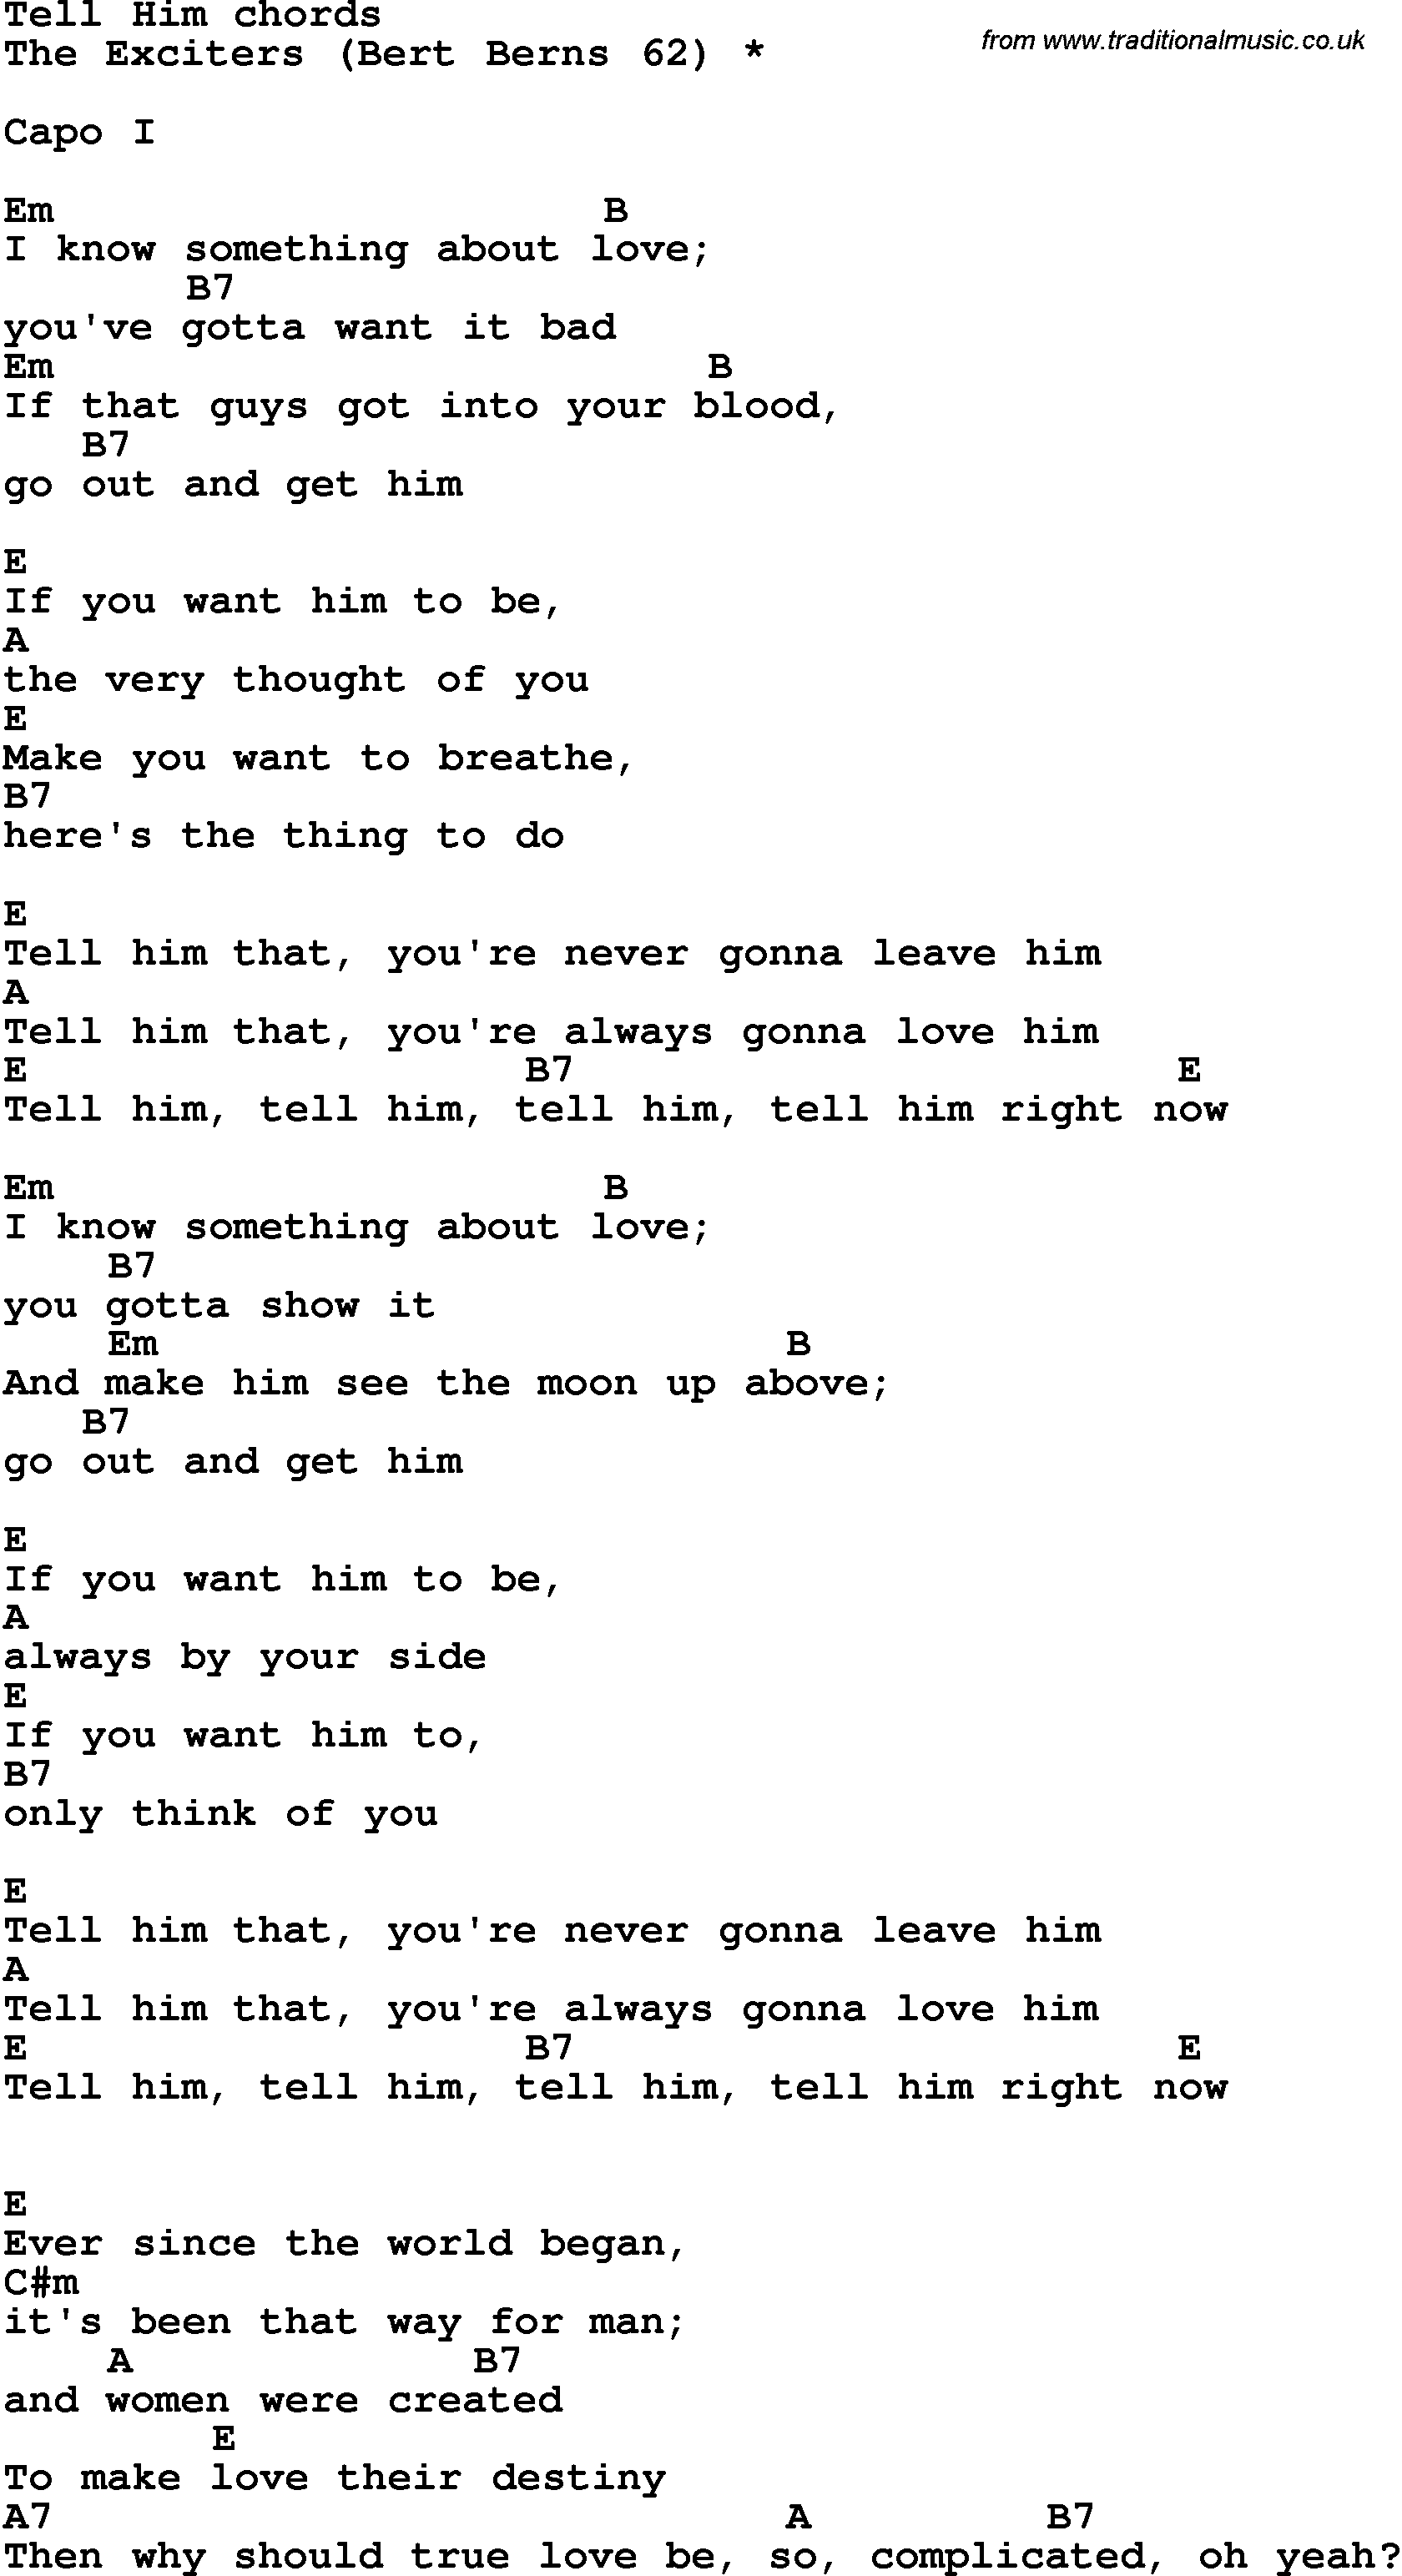 Song Lyrics with guitar chords for Tell Him - The Exciters